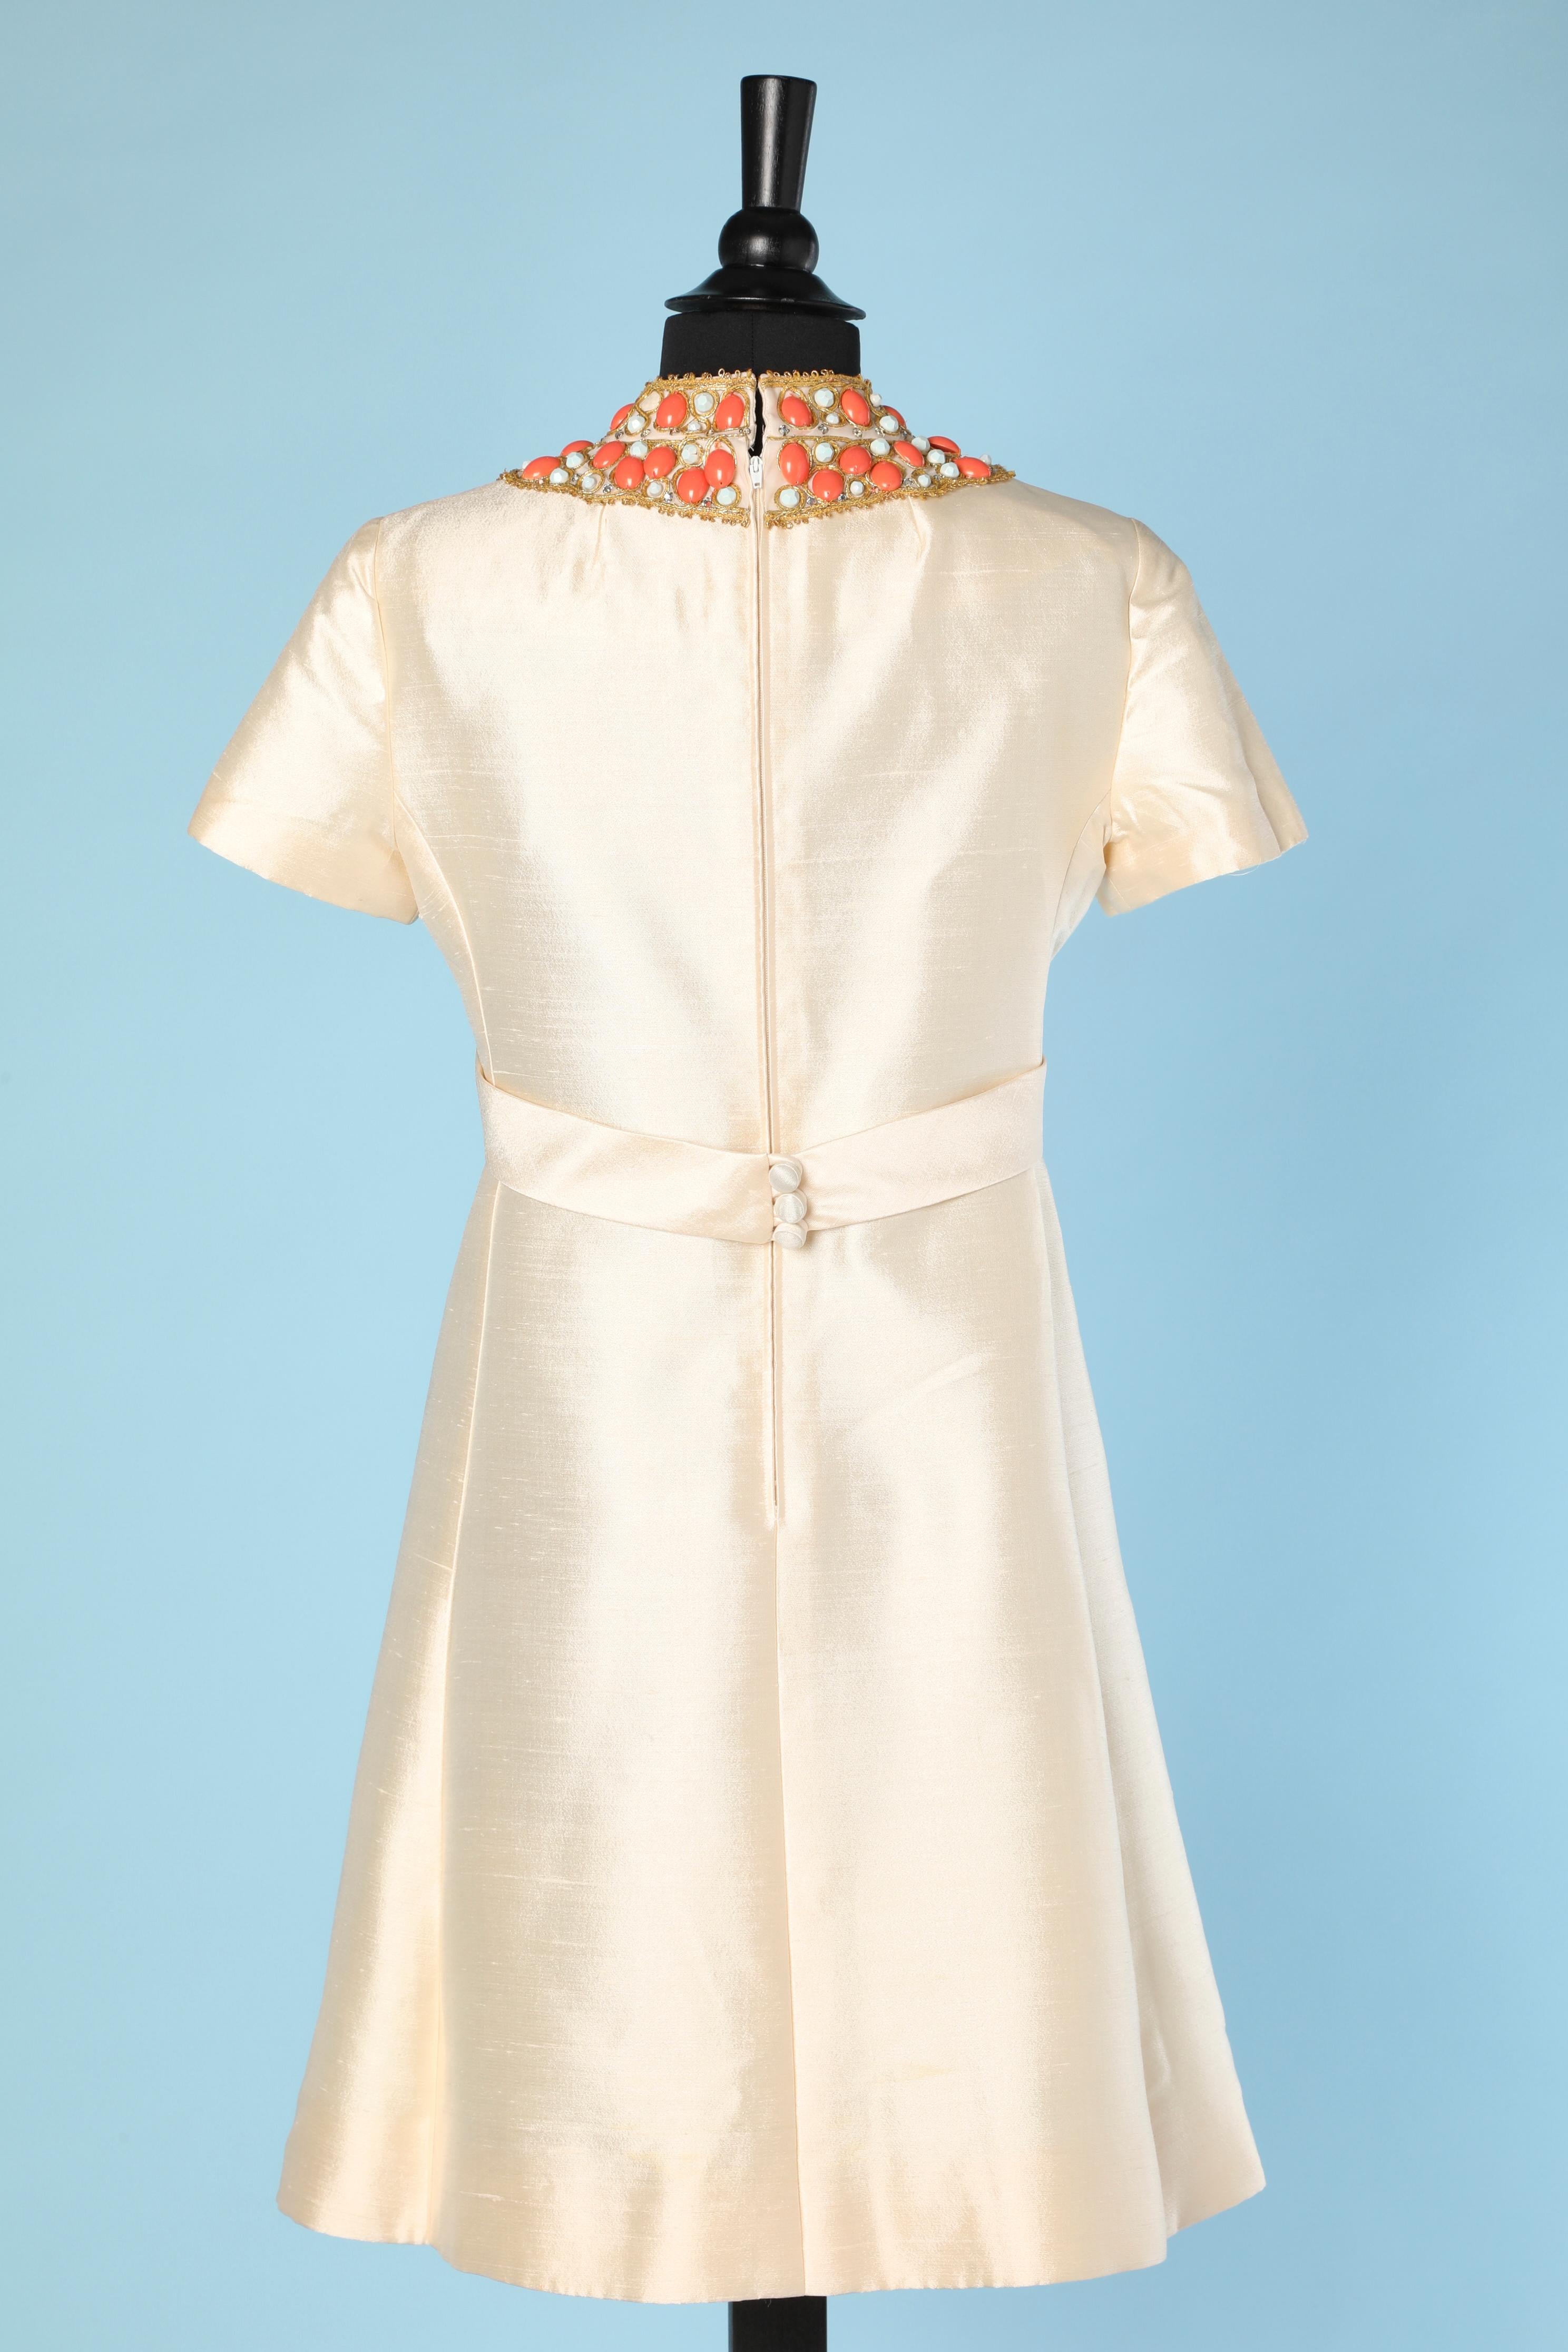 1960's wild silk dress with beads and gold threads embellishment around the neck.
SIZE 36 (S) 